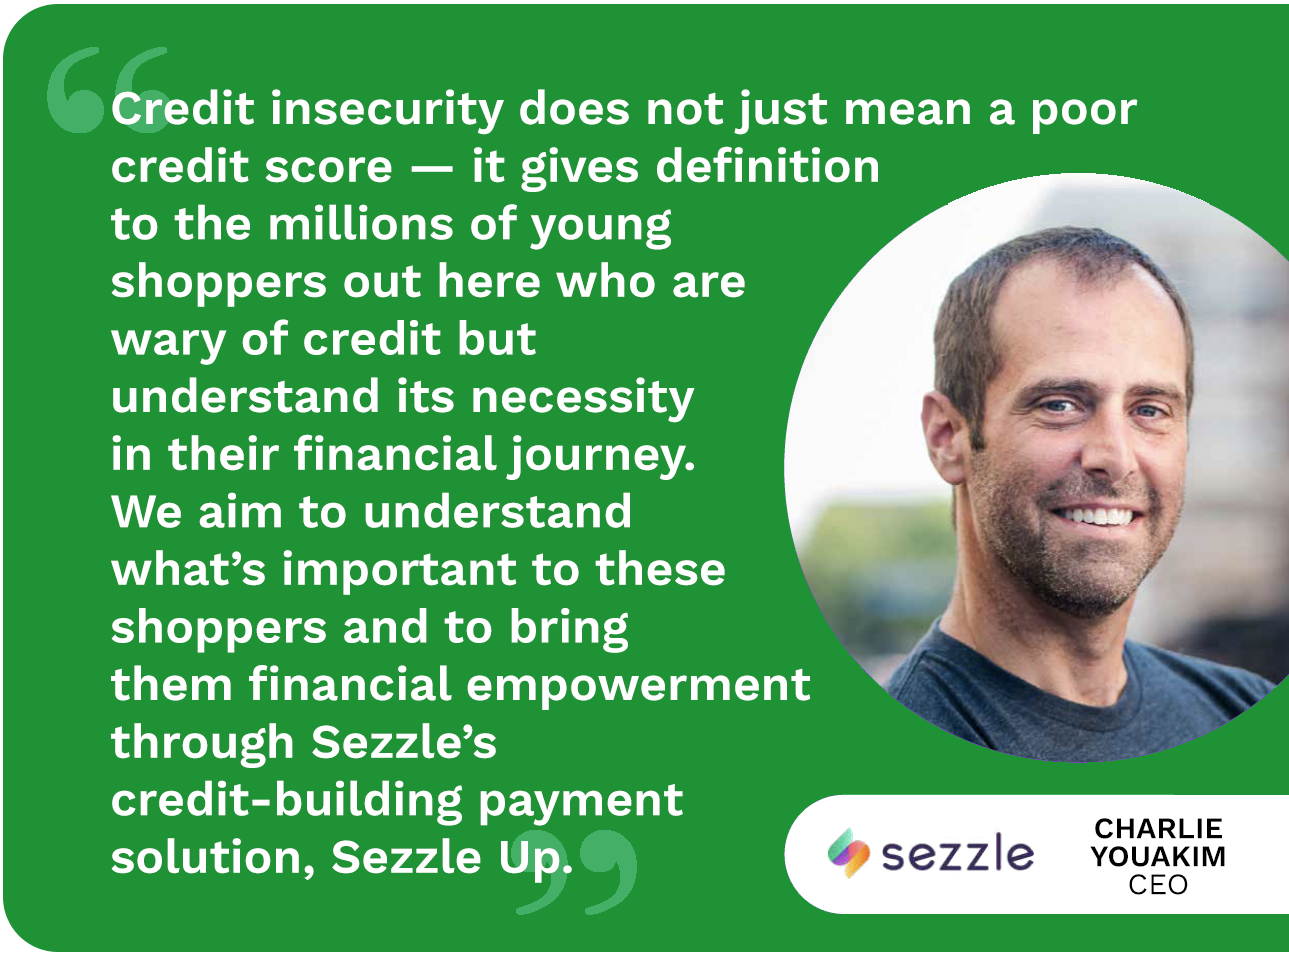 Charlie Youakim, CEO of Sezzle, discusses credit insecurity.